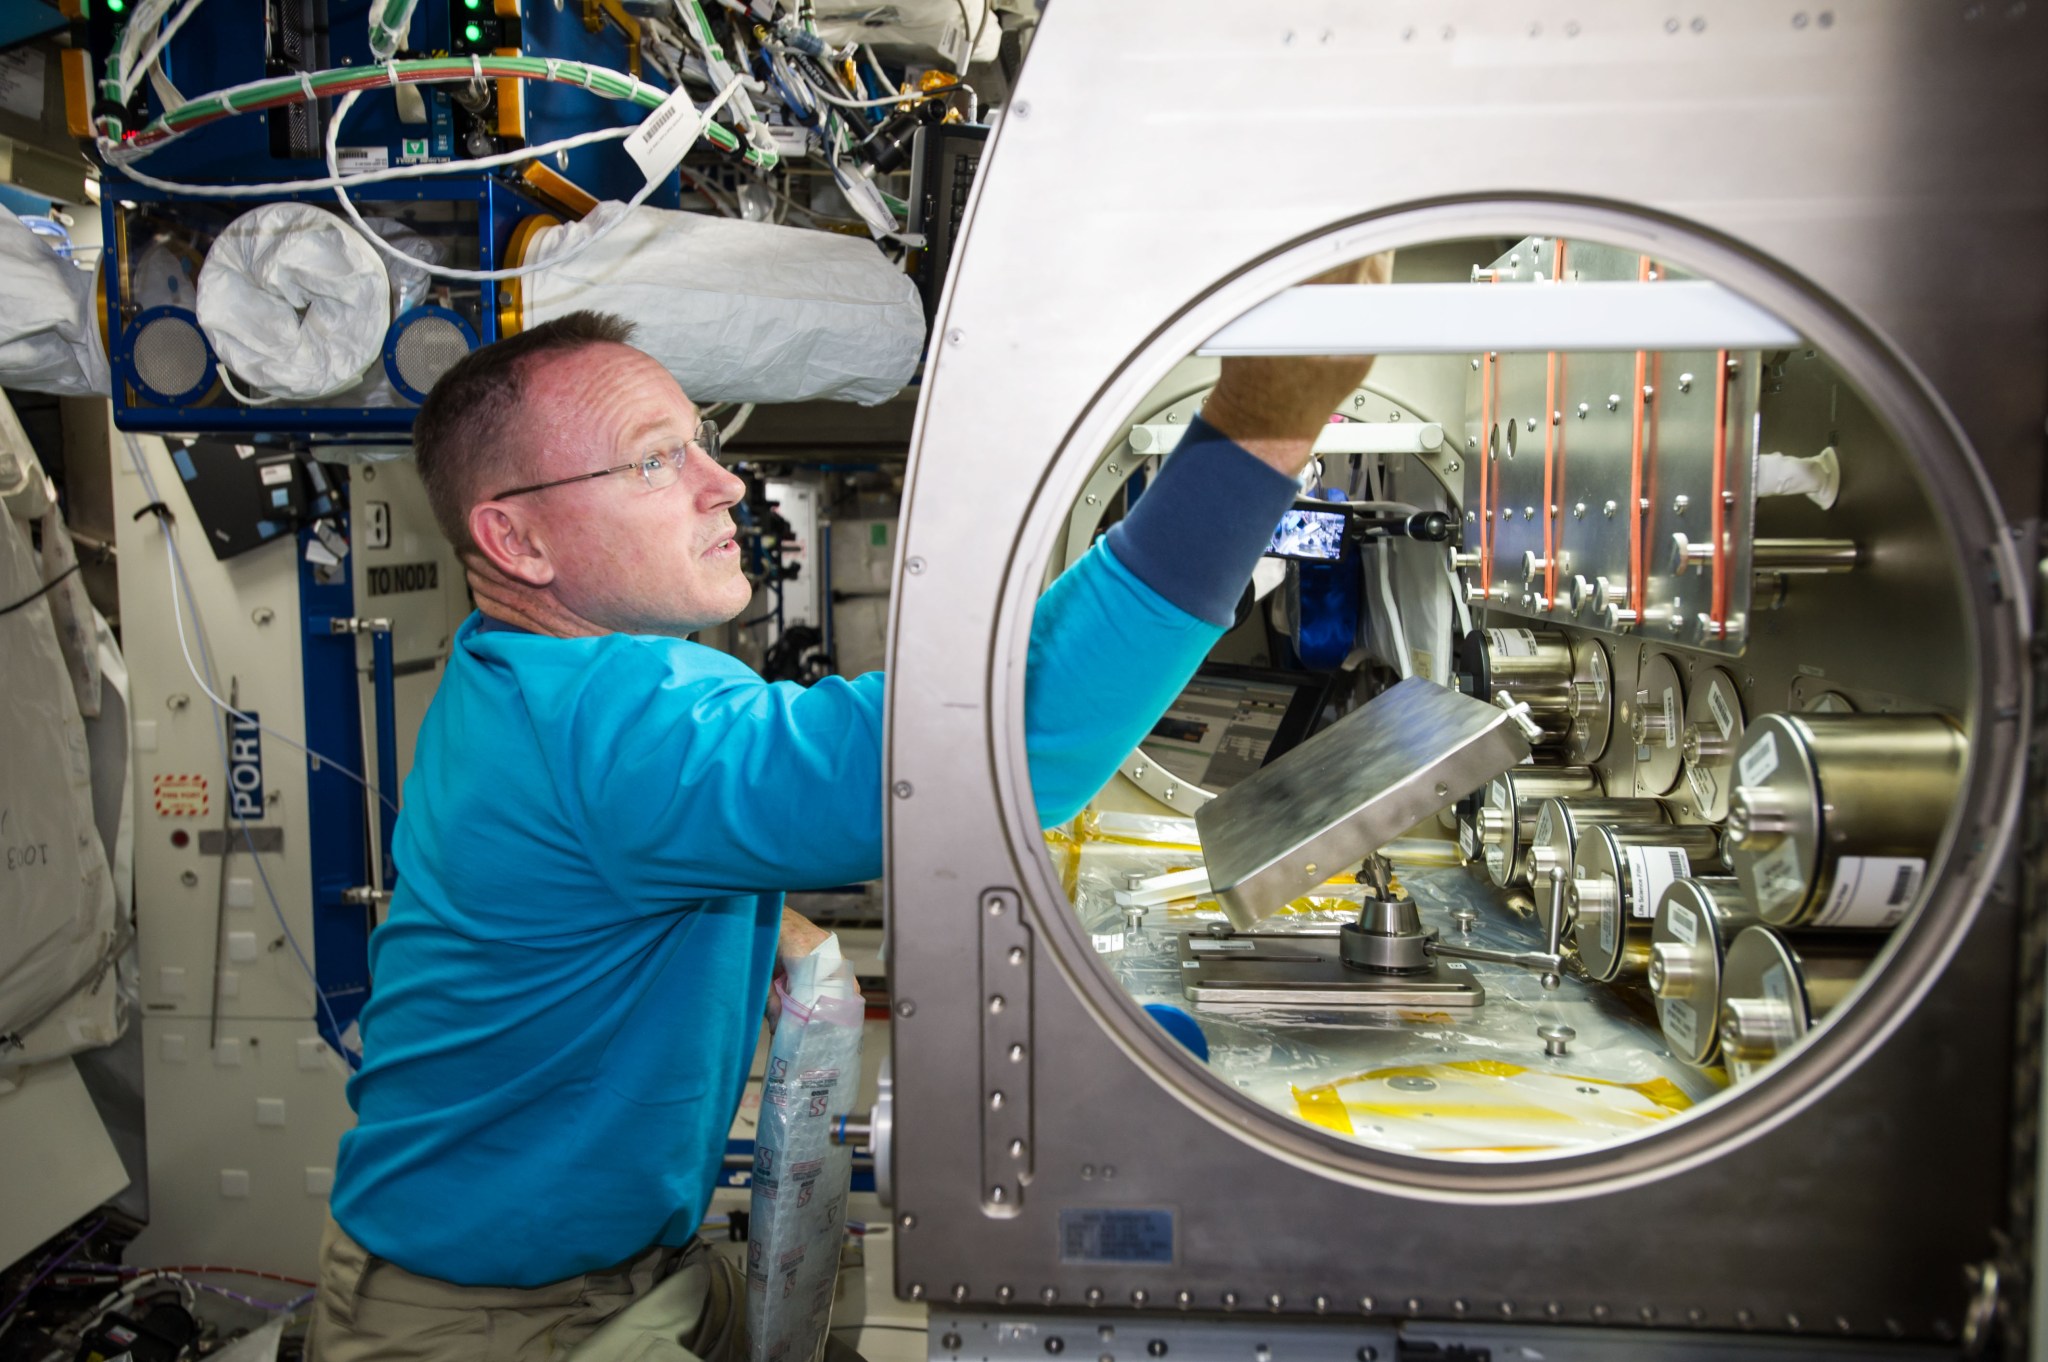 NASA astronaut Barry "Butch" Wilmore setting up the Rodent Reseach-1 Hardware in the Microgravity Science Glovebox aboard the International Space Station